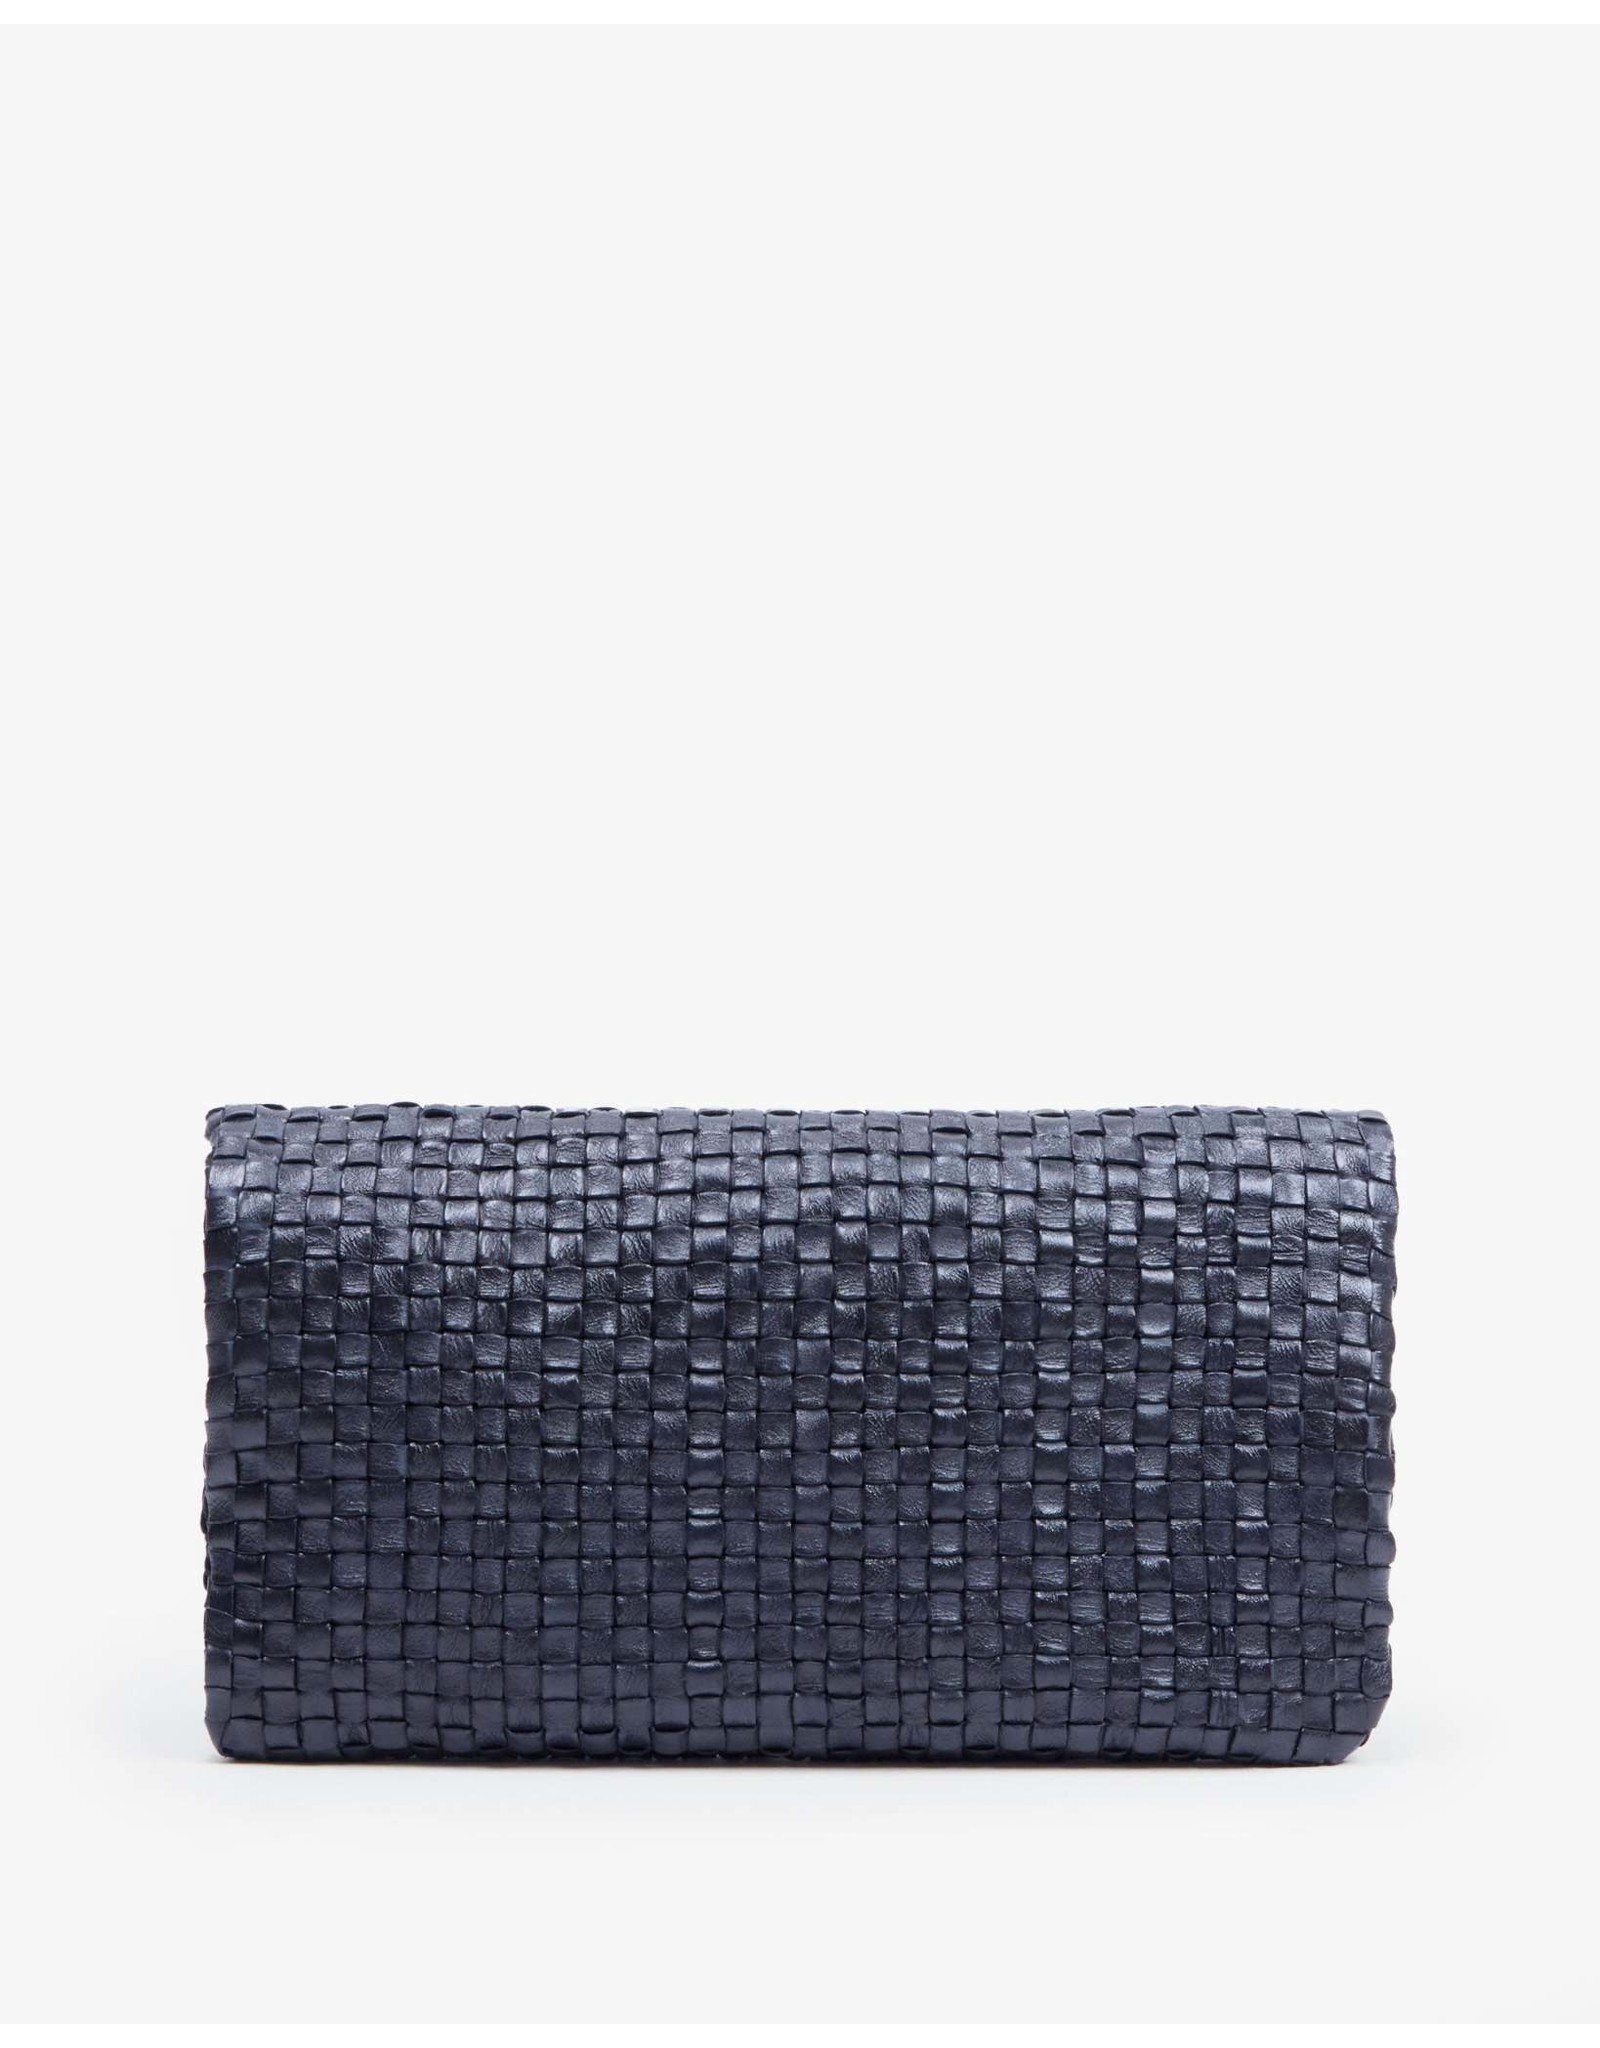 Clare V Foldover Clutch with Tabs